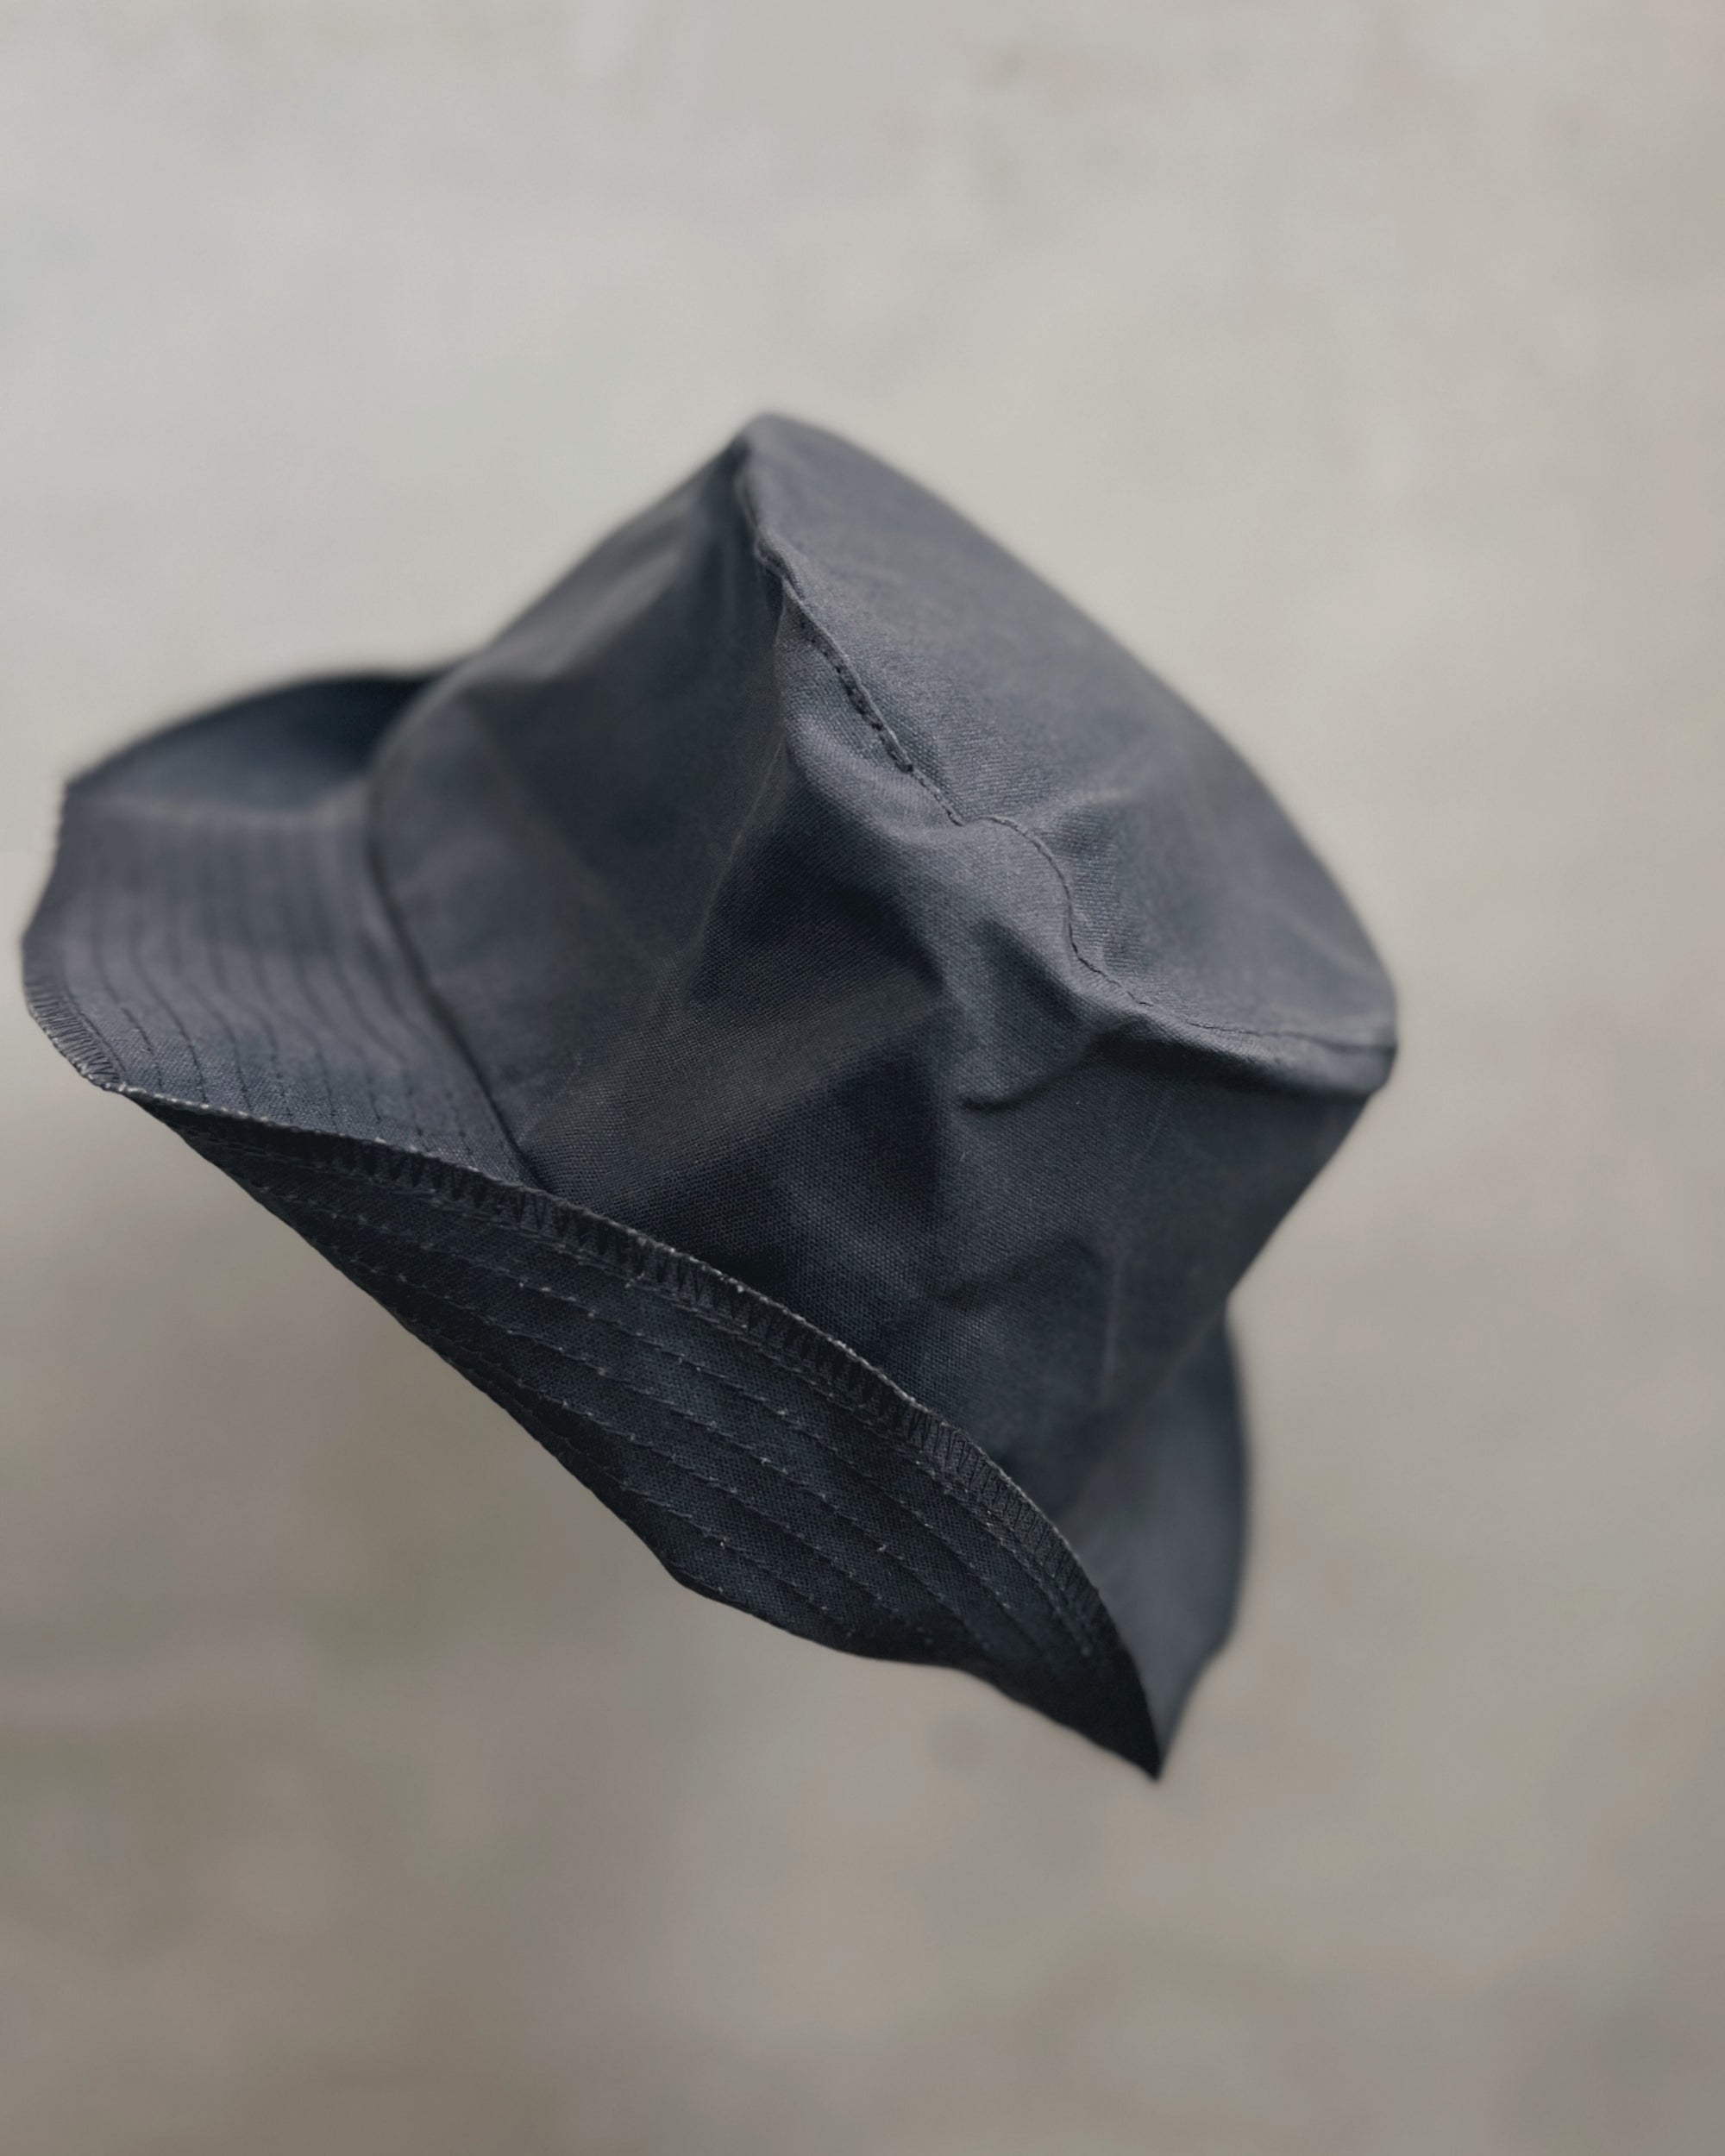 mature ha : paraffin hat in charcoal